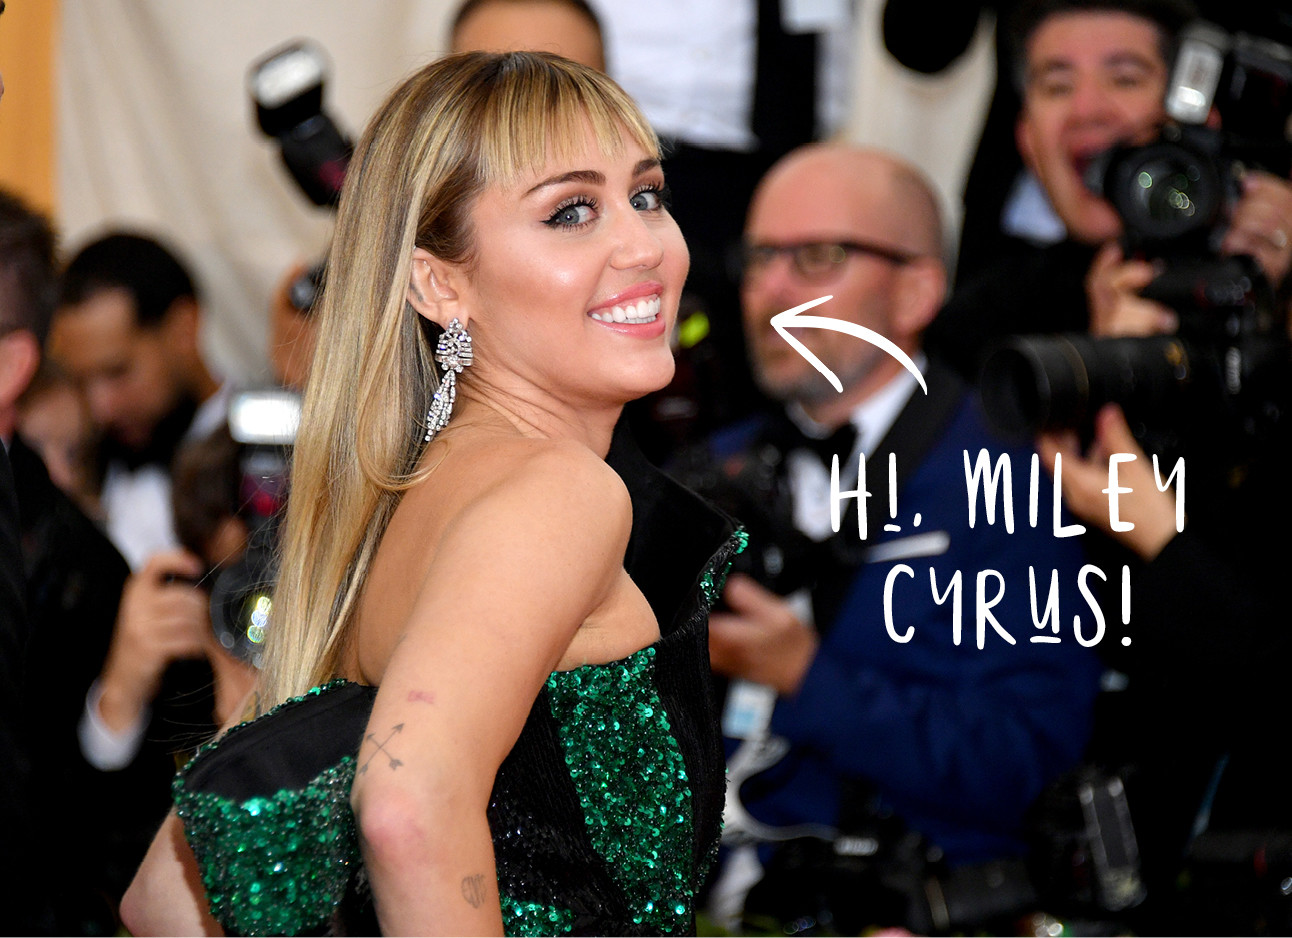 miley cyrus at the met gala in a green & black dress, smiling at the camera's, with blond hair and bangs